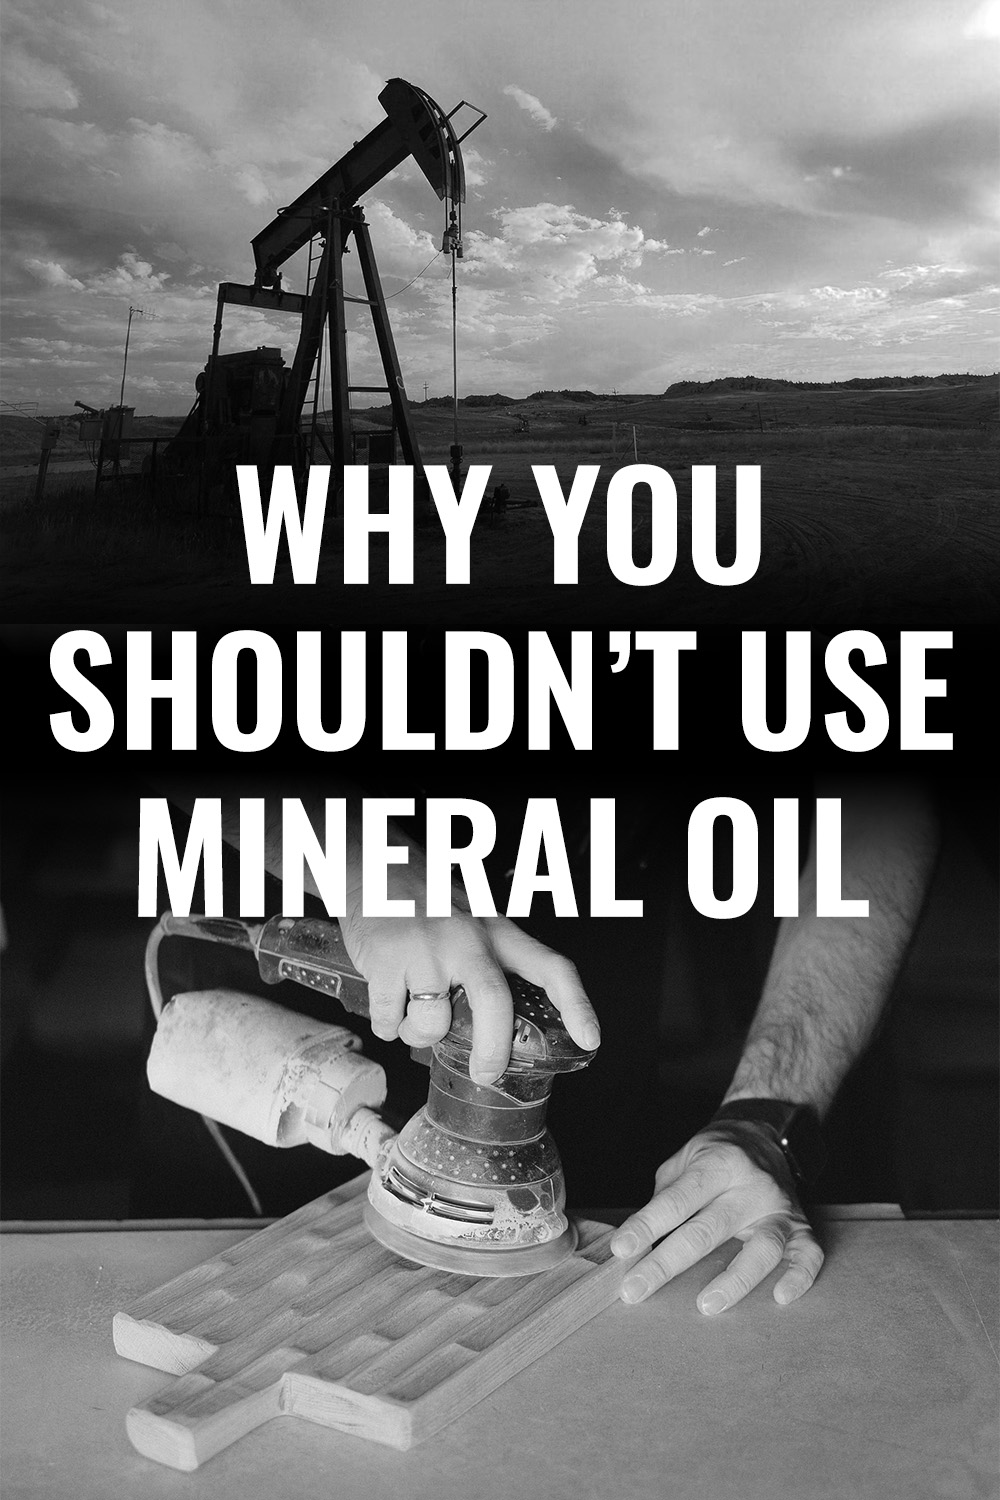 Why not to use mineral oil featured image